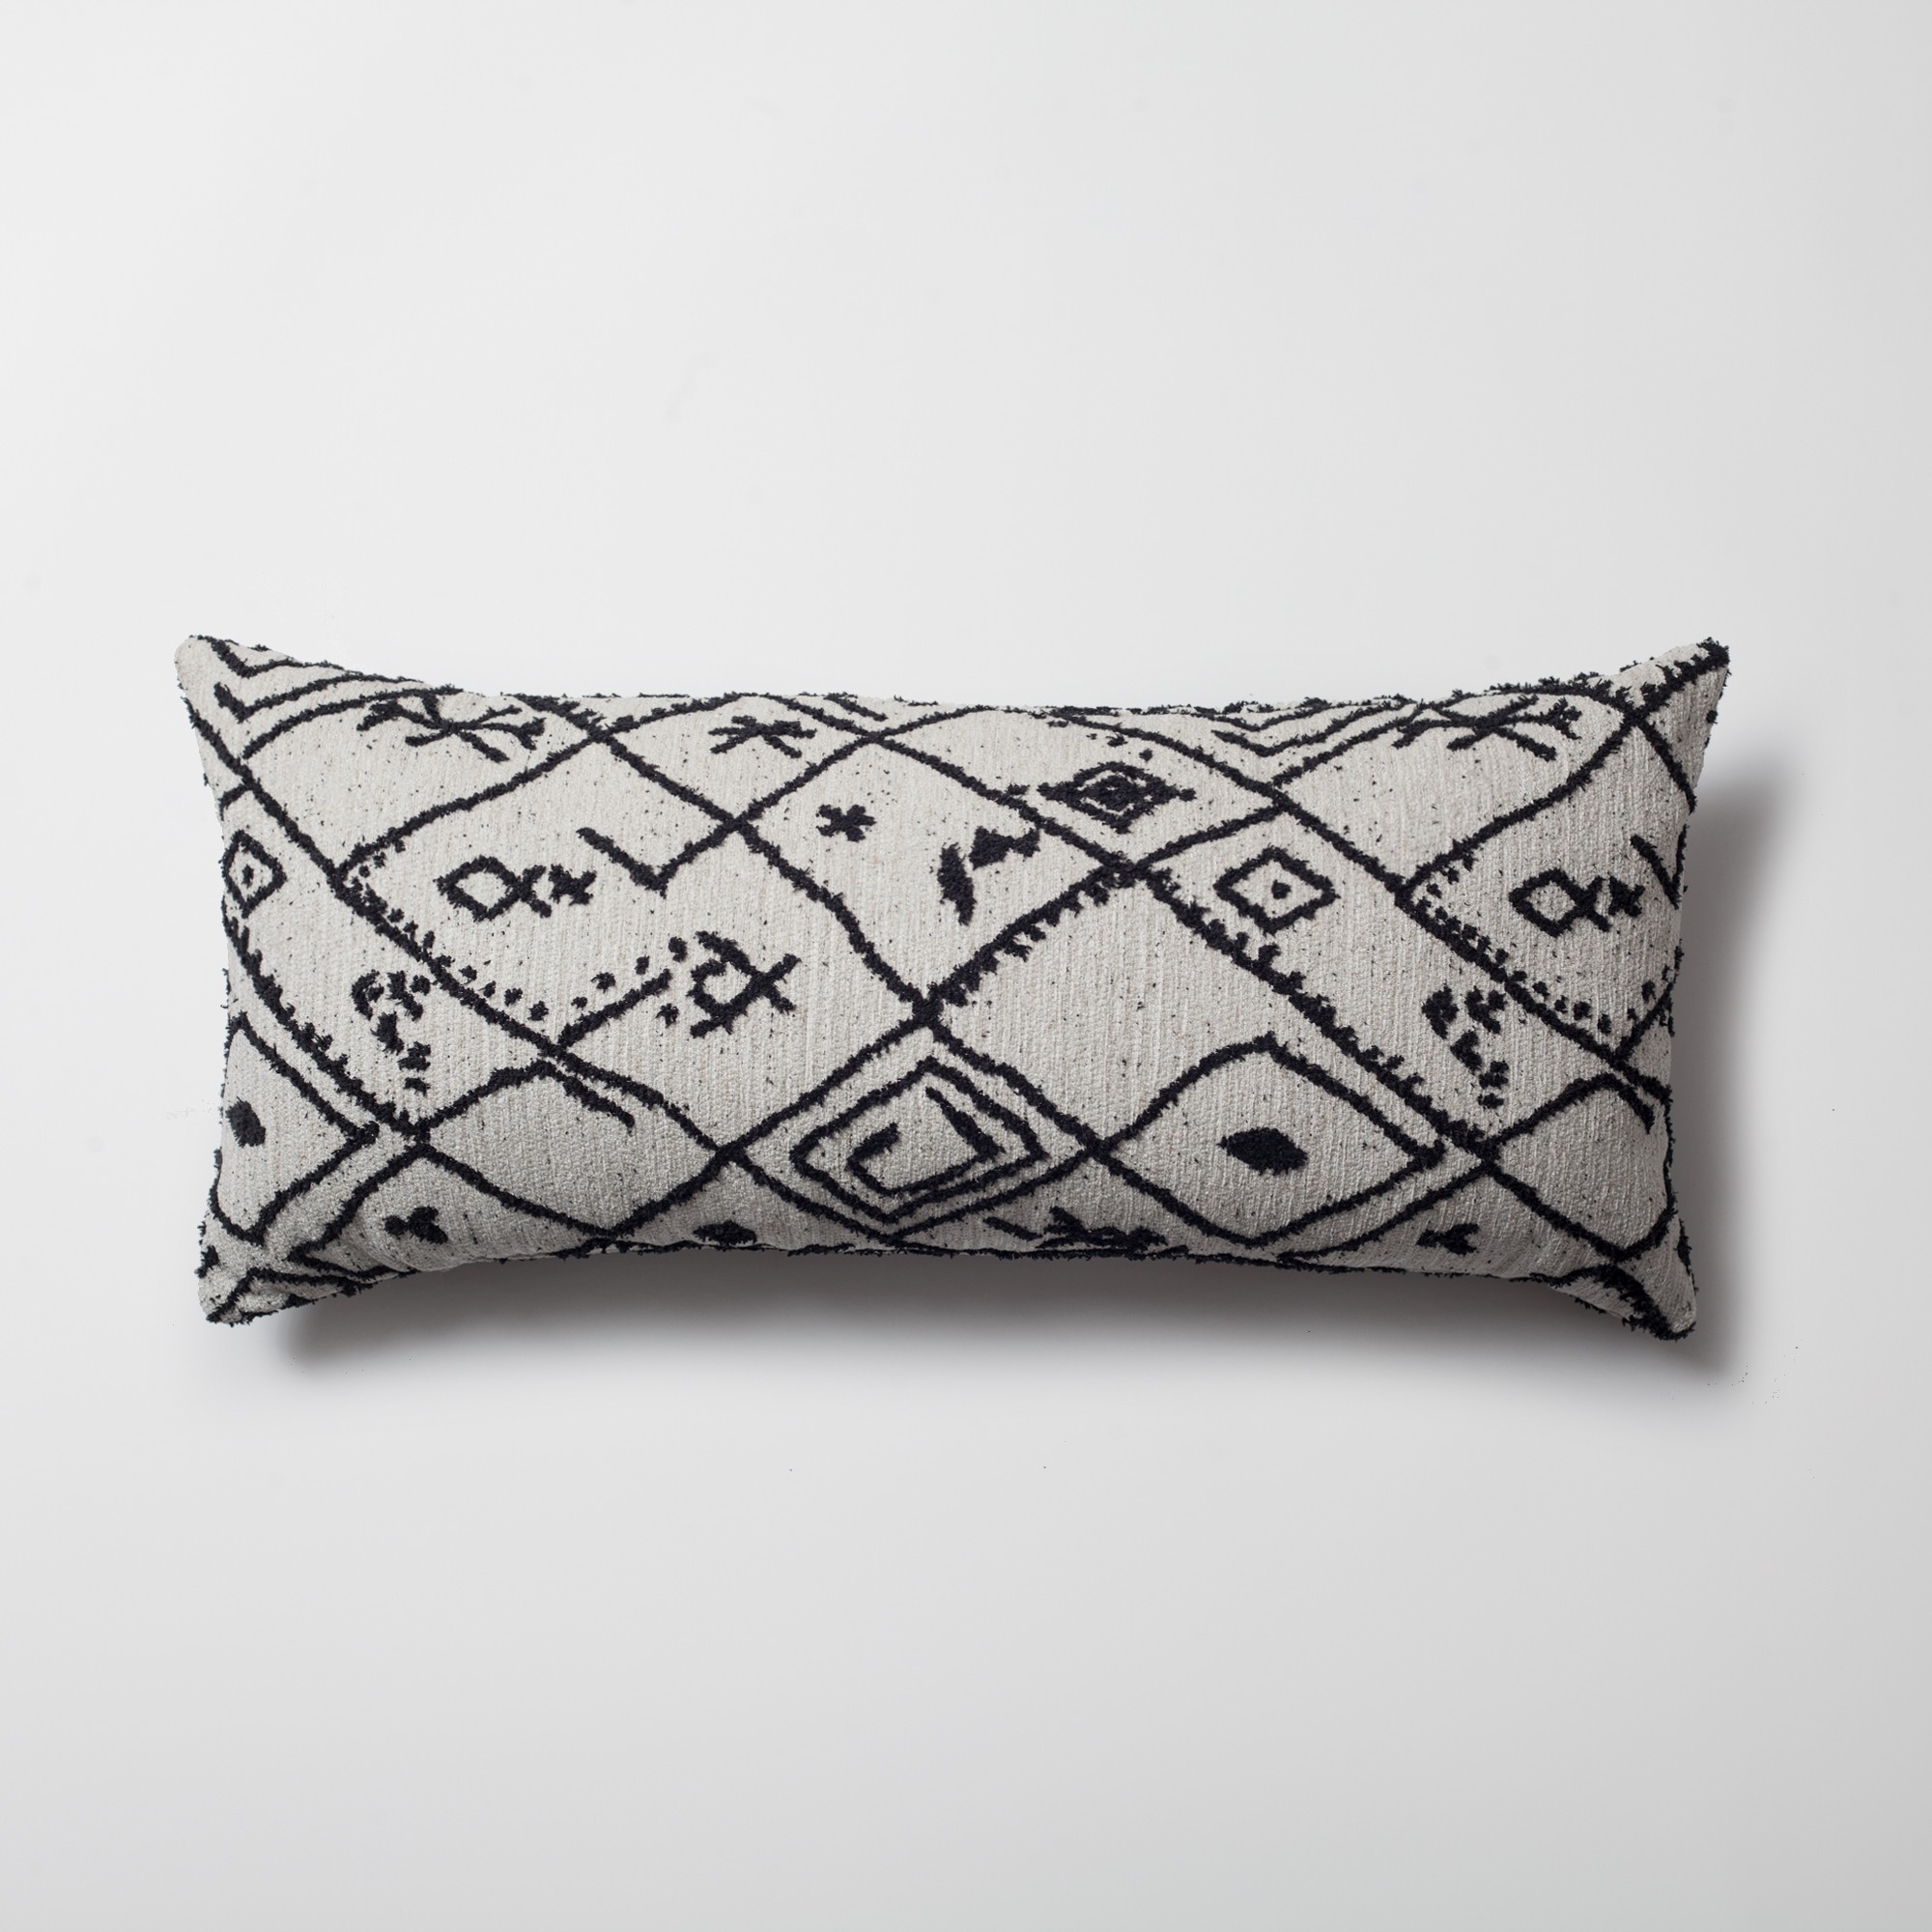 "Merino" - Ethnic Motif Patterned Pillow 14x28 Inch - Black and White (Cover Only)